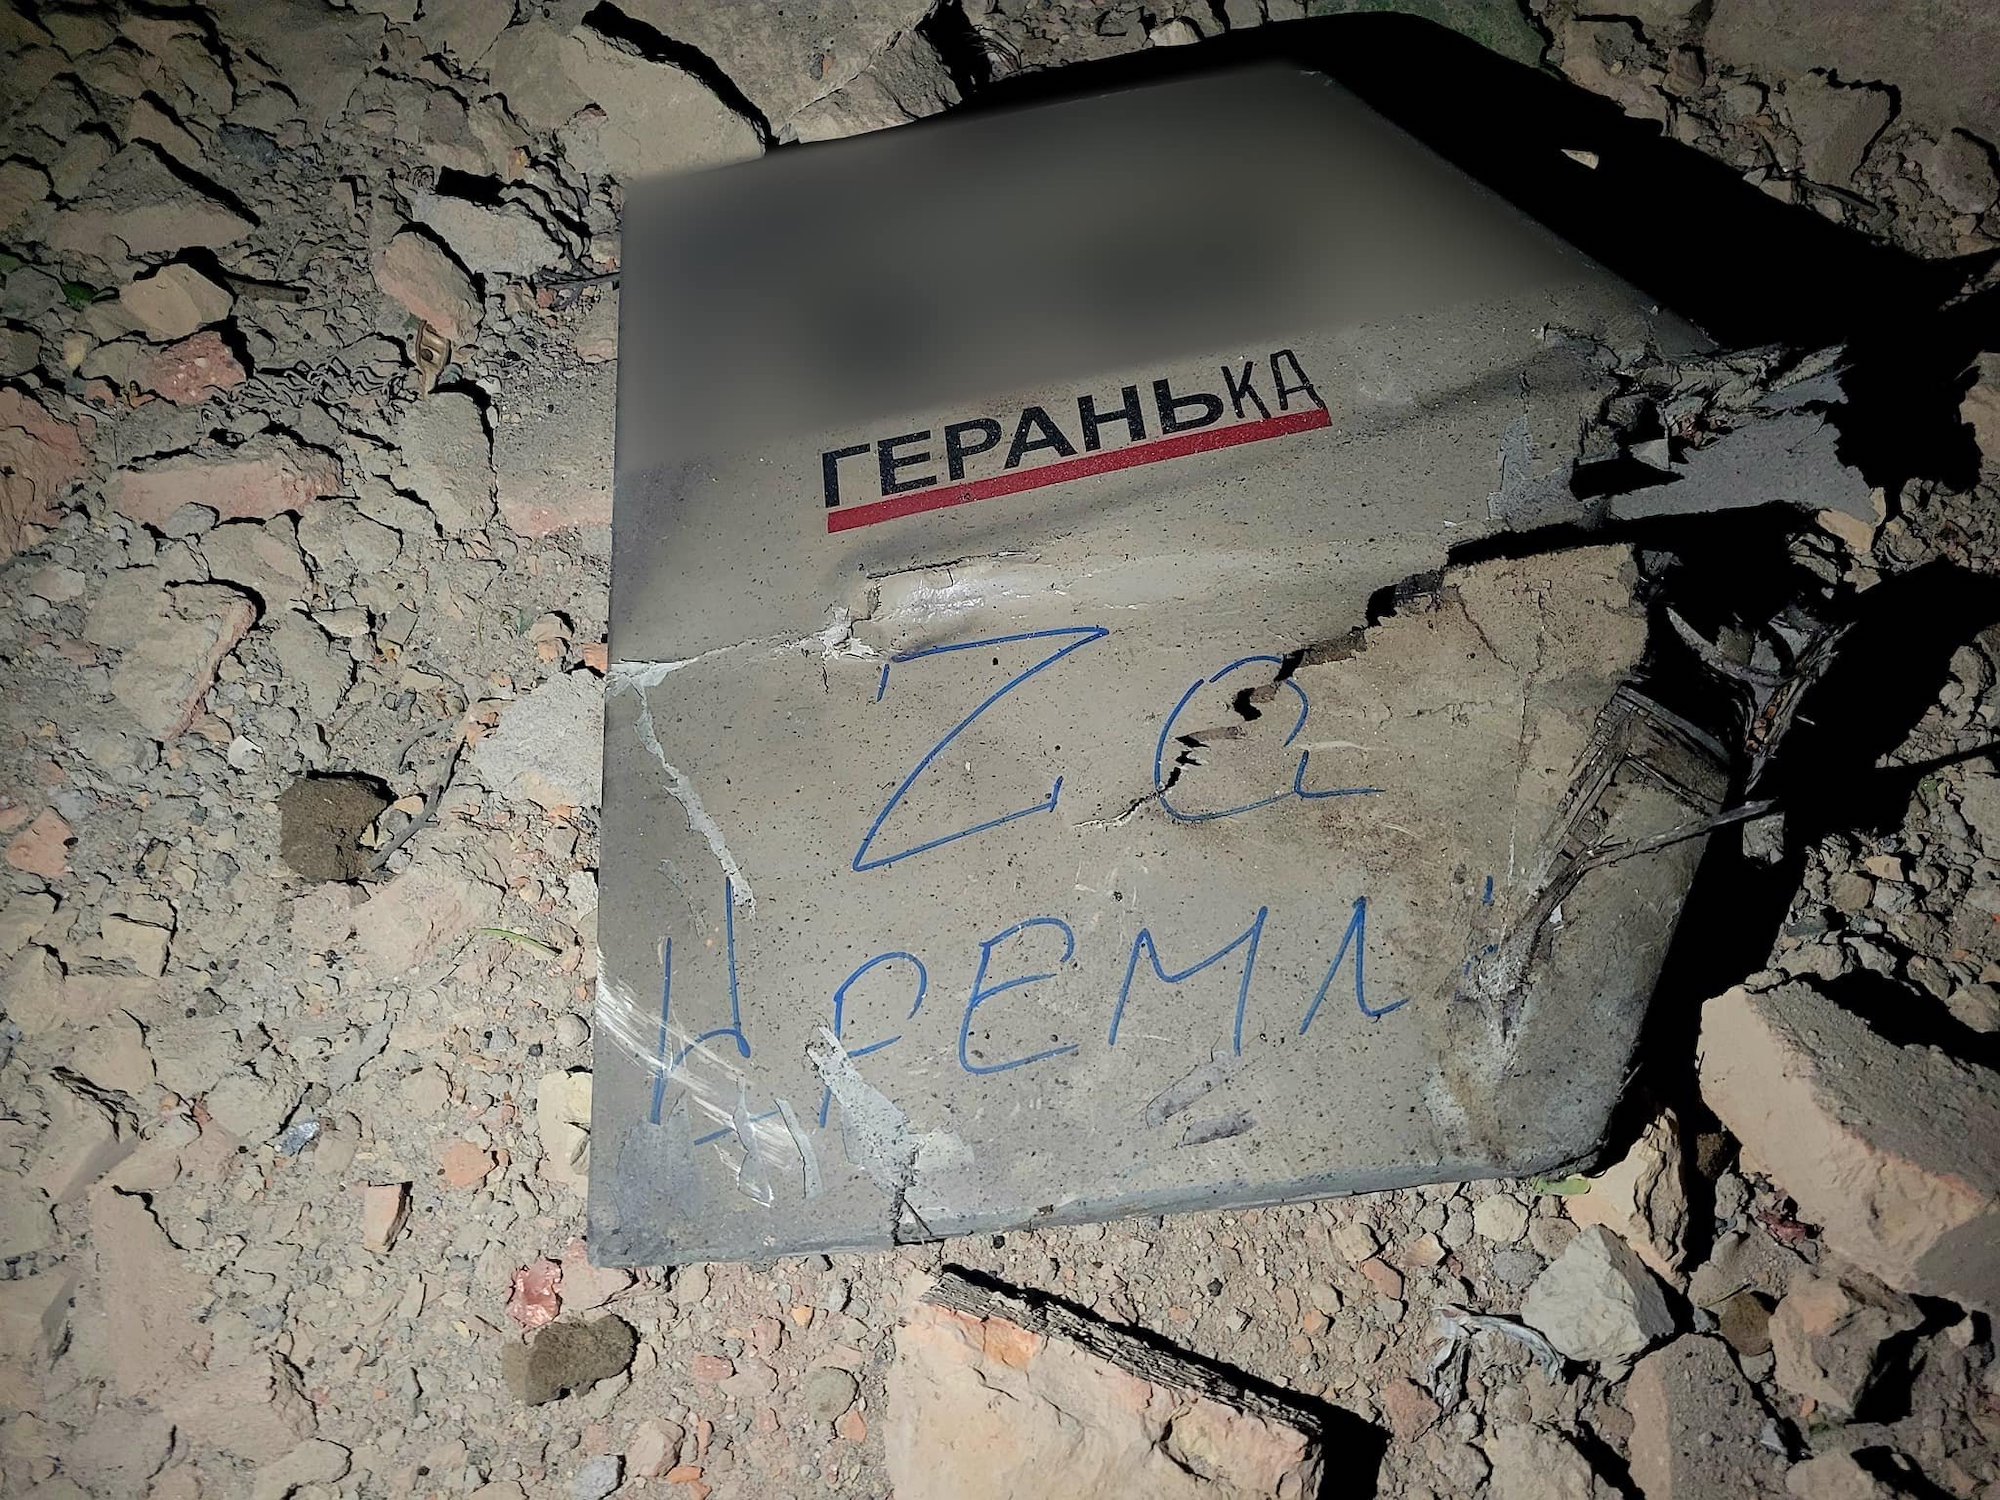 An apparent message on the tail of a downed Russian drone reads "For the Kremlin," in this photo supplied by the Ukrainian military.